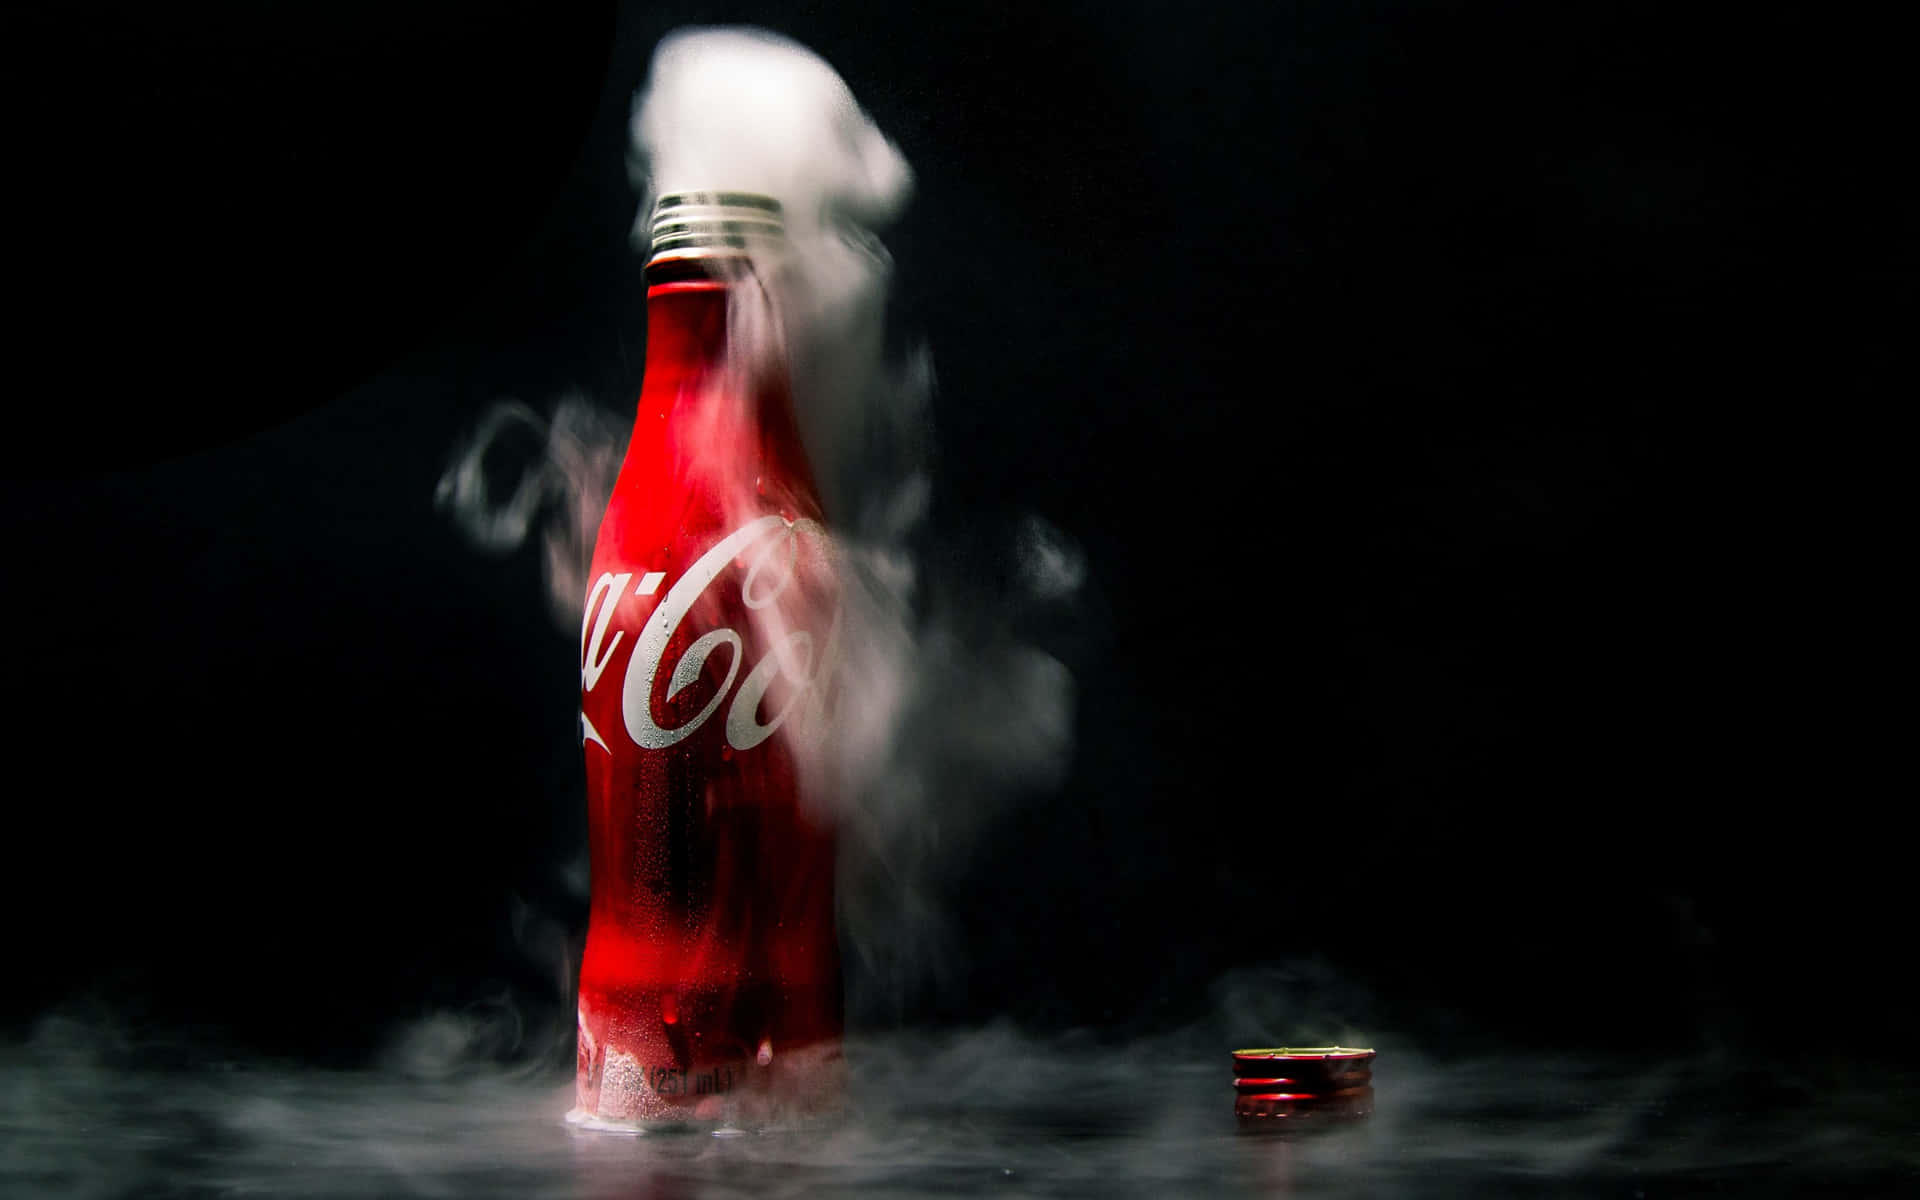 A Coca Cola Bottle Is Leaking